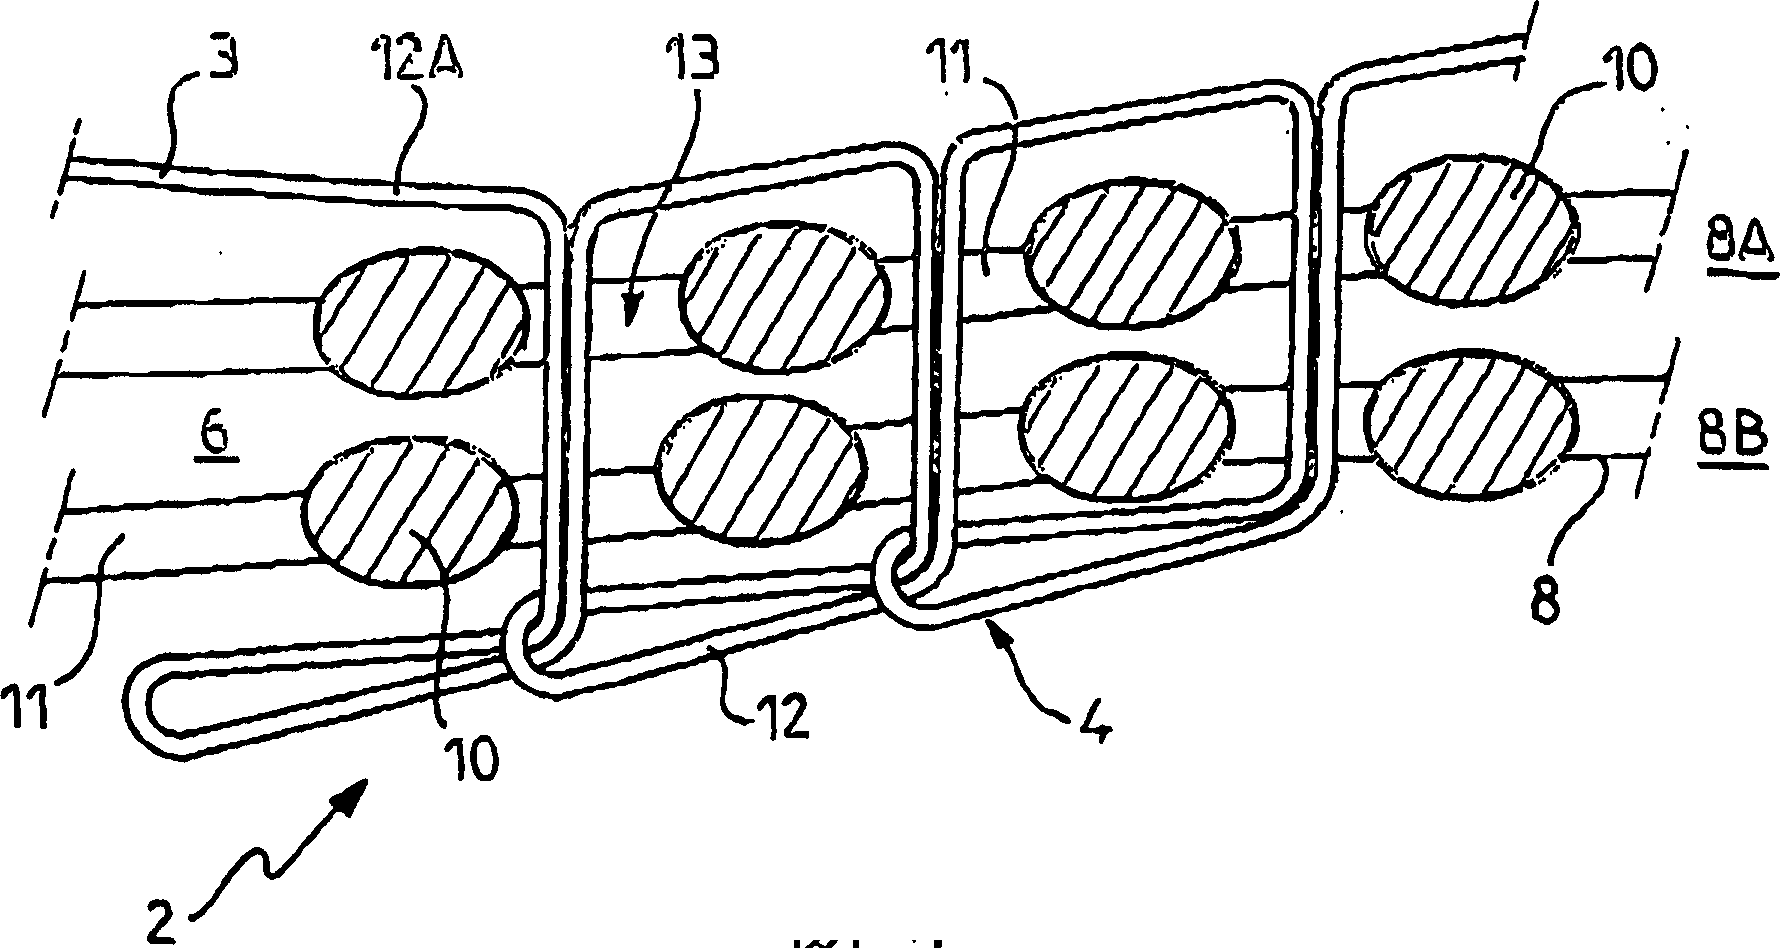 Kit for the insertion of an intragastric implant, case for inserting such an implant, and corresponding production method